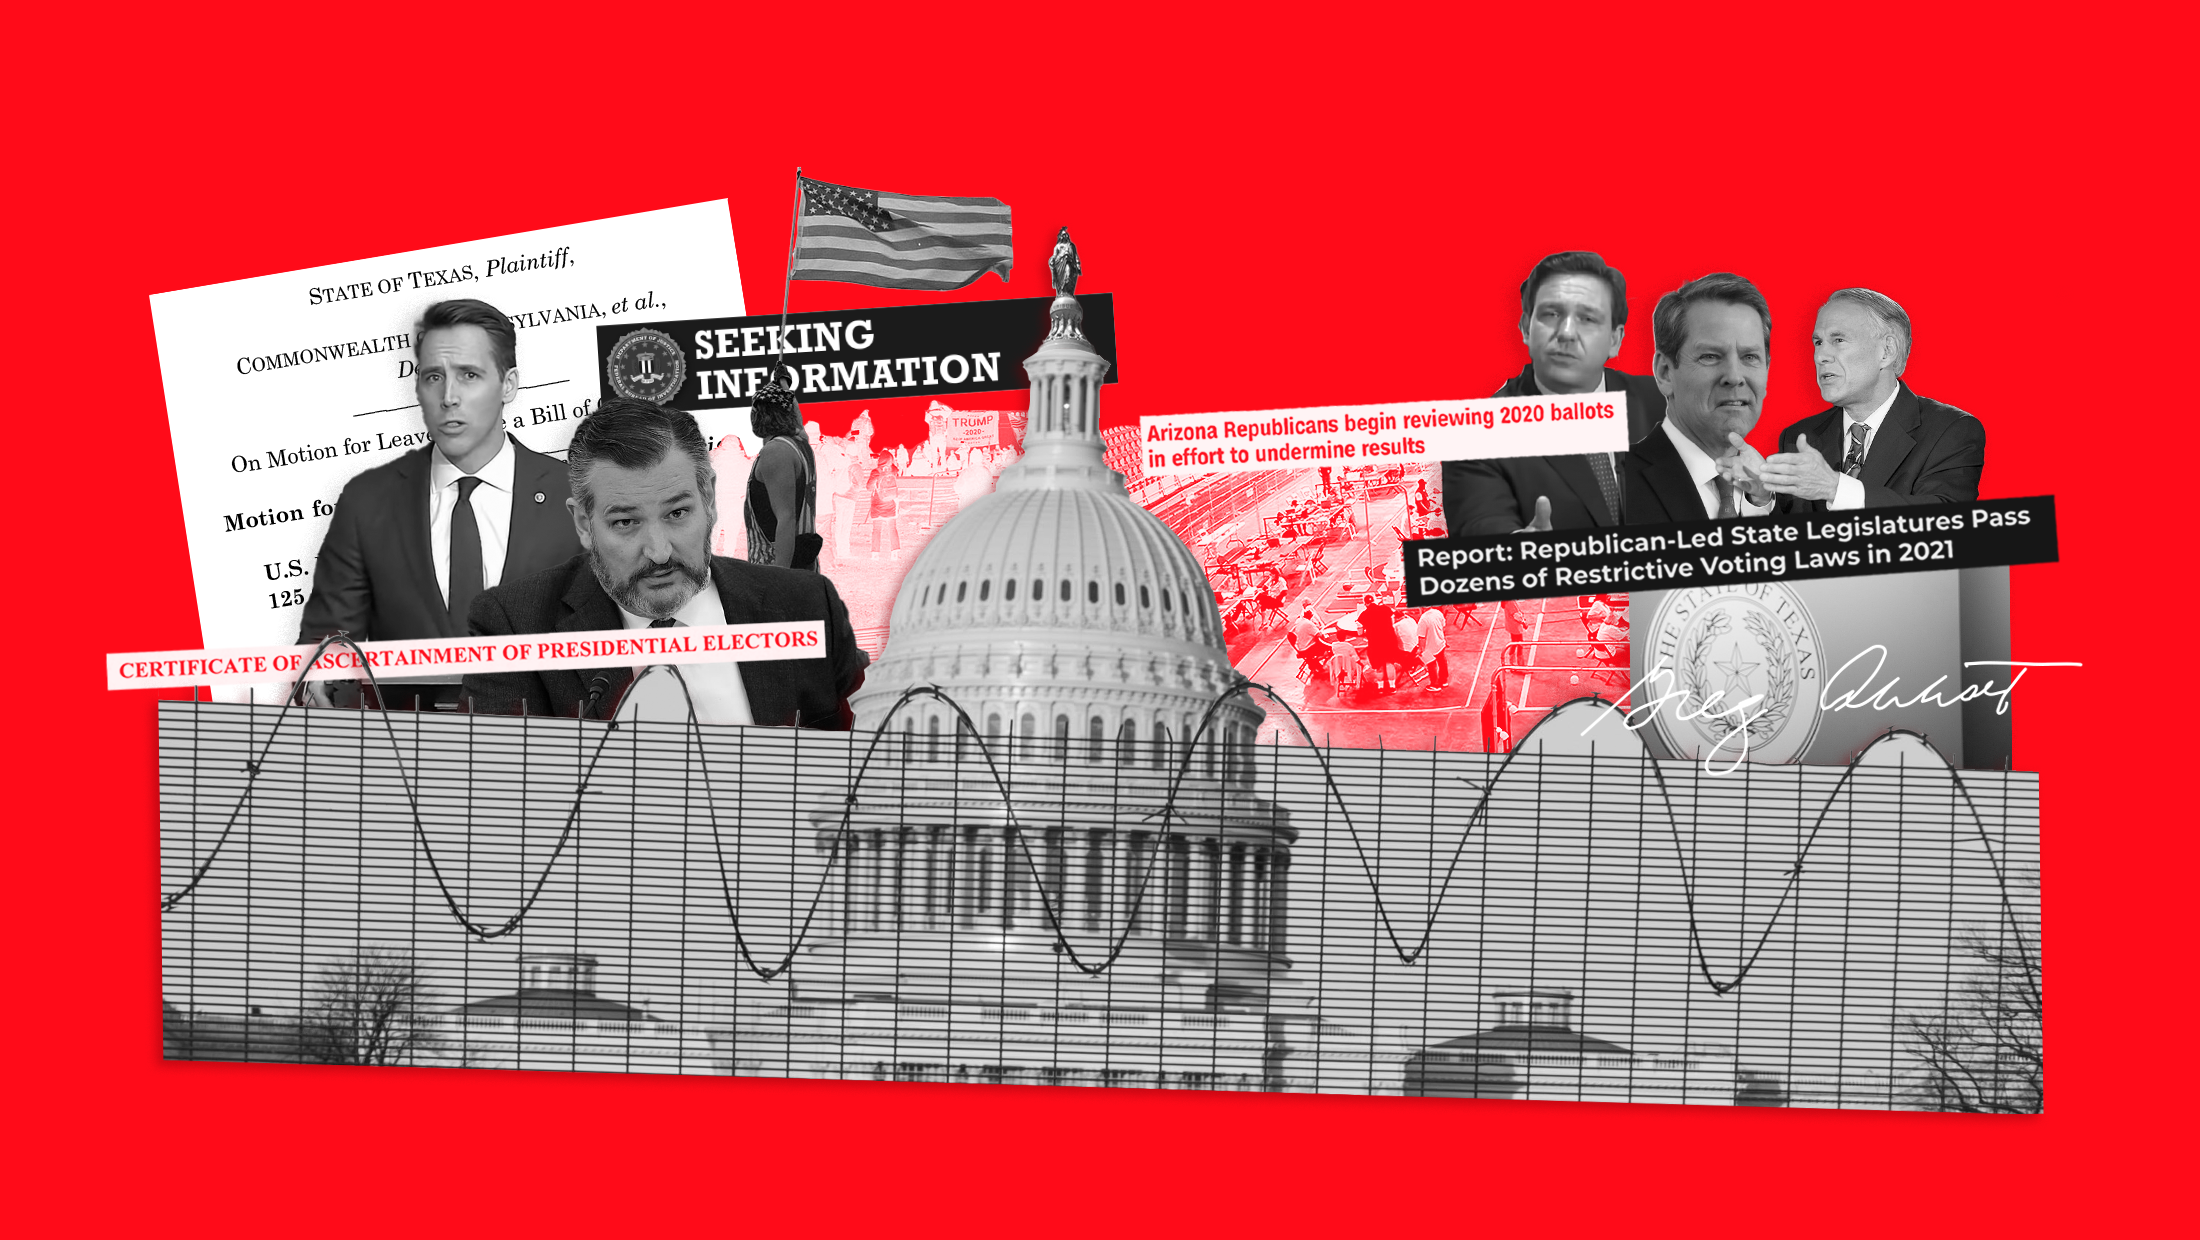 A collage featuring the U.S. Capitol behind a barbed wire fence, Senators Josh Hawley (R-MO) and Ted Cruz (R-TX), a clipping from the 2020 post-election lawsuit filed by the state of Texas in the U.S. Supreme Court seeking to overturn the election results, a January 6th insurrectionist holding an American flag, a clipping from a FBI Wanted poster that reads "SEEKING INFORMATION," people oberserving ballots as part of Arizona's sham audit of the 2020 election results paired with a clipping that reads "ARIZONA REPUBLICANS BEGIN REVIEWING 2020 BALLOTS IN EFFORT TO UNDERMINE RESULTS," Florida Gov. Ron DeSantis (R), Georgia Gov. Brian Kemp (R) and exas Gov. Greg Abott paired with a clipping that reads, "REPORT: REPUBLICAN-LED STATE LEGISLATURES PASS DOZENS OF RESTRICTIVE VOTING LAWS IN 2021"